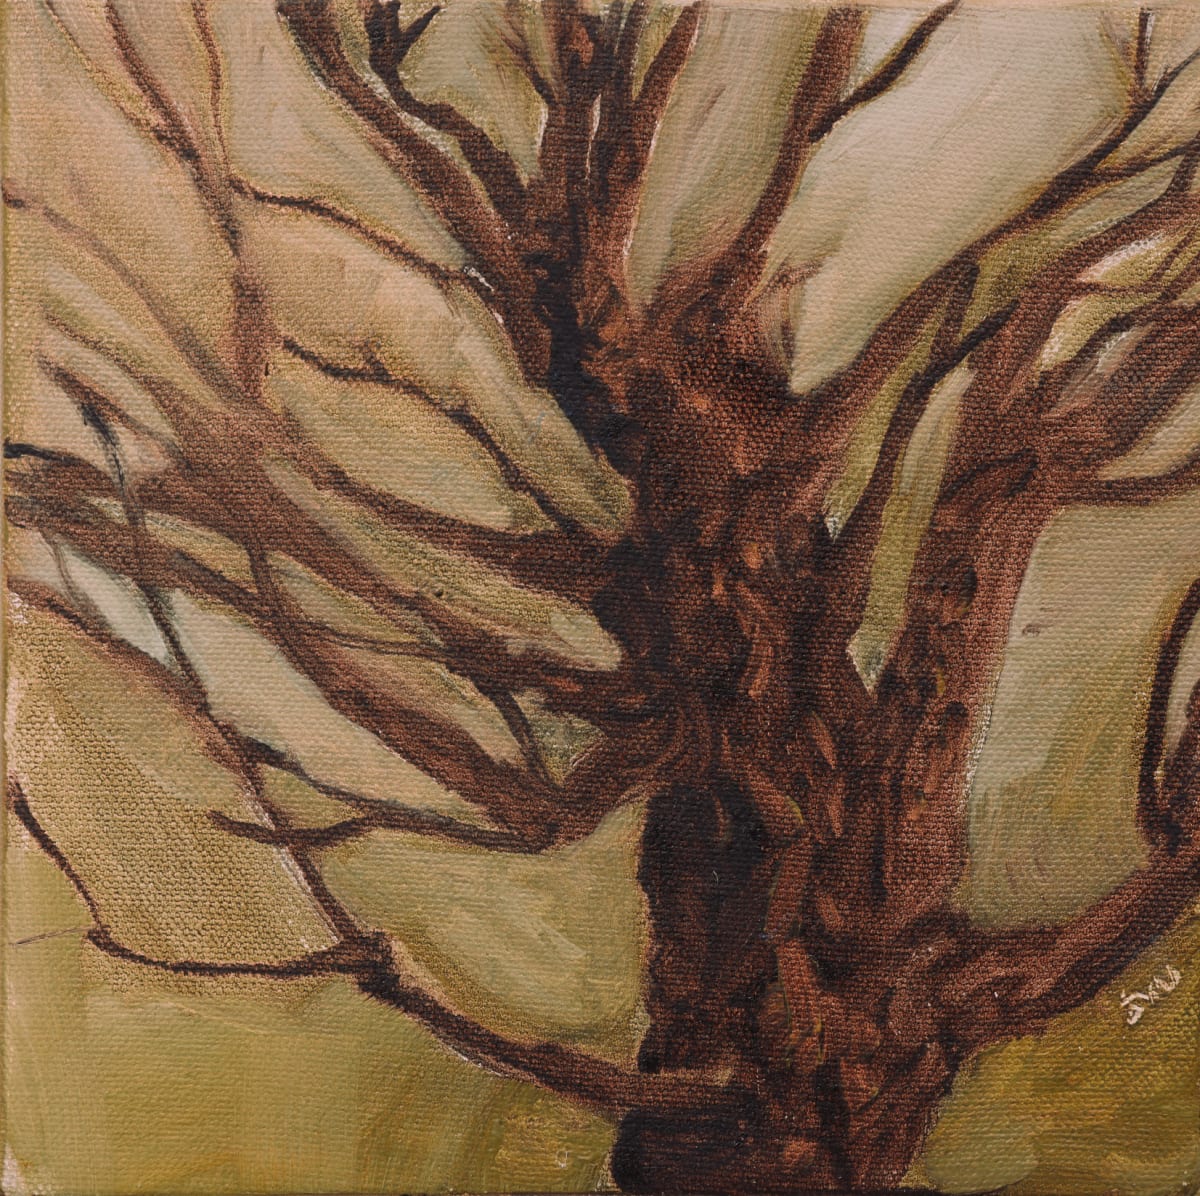 winter branches by beth vendryes williams  Image: winter branches